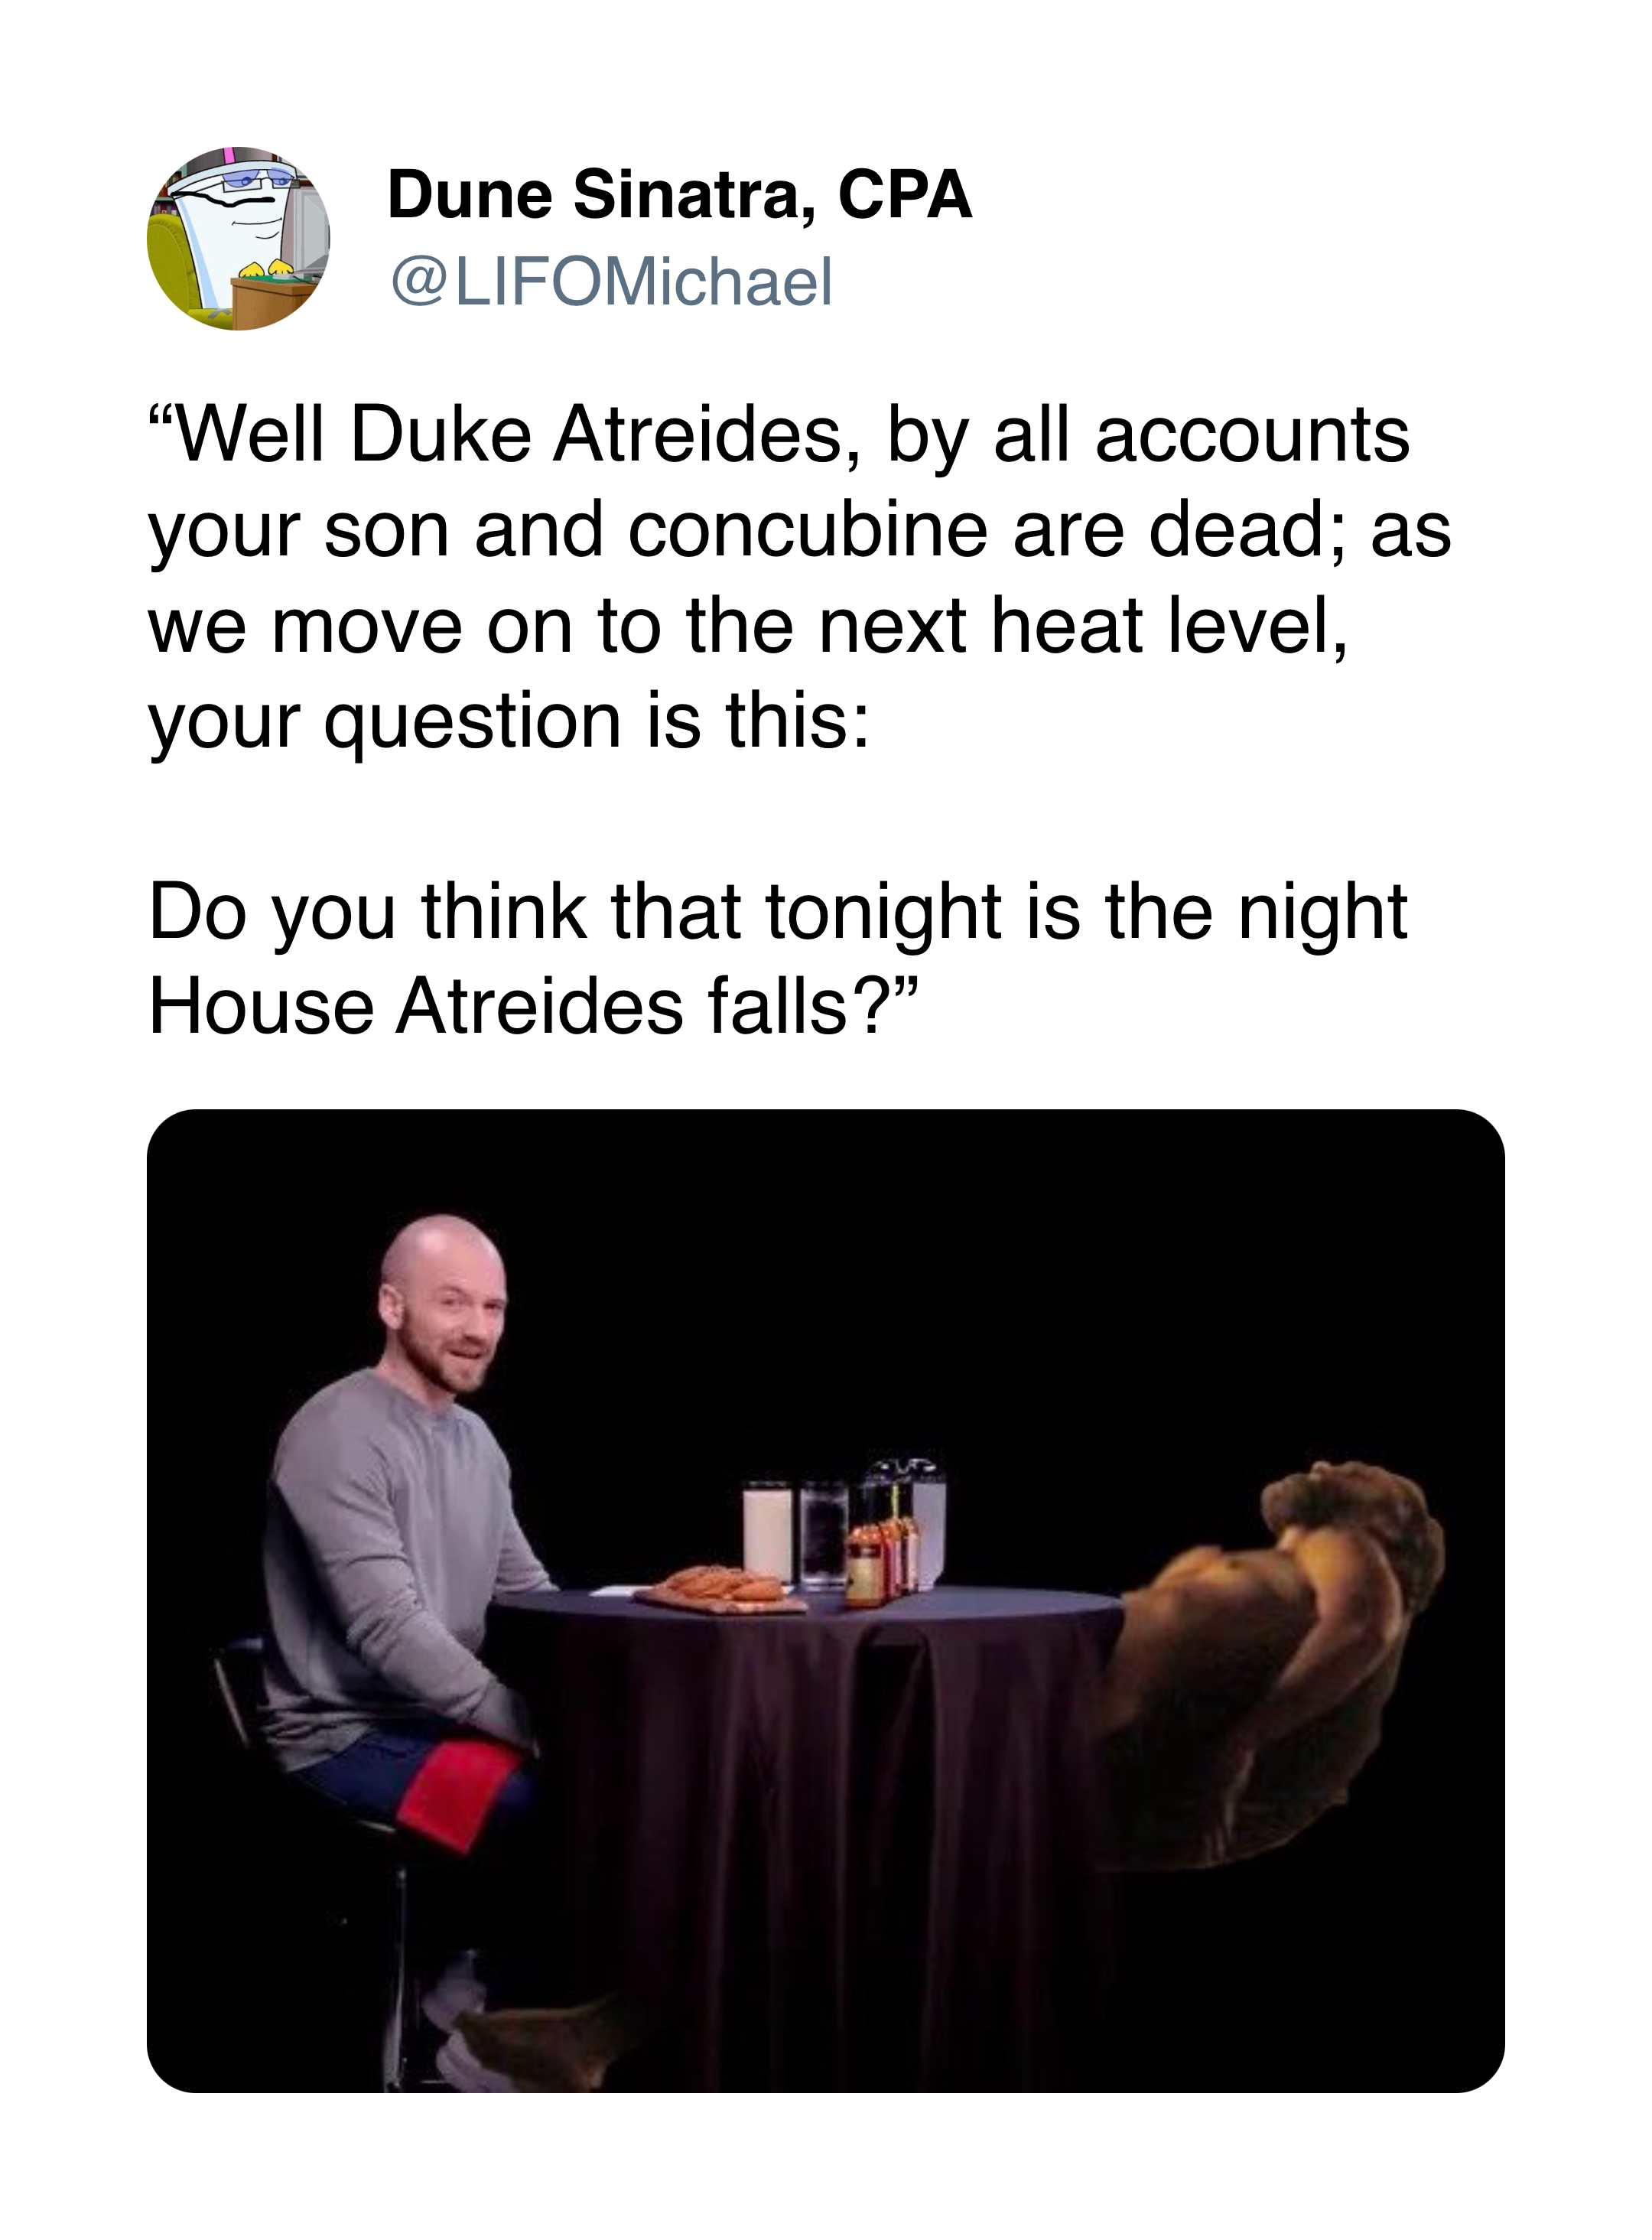 @LIFOMichael on Twitter: A photoshop of Duke Leto Atreides after he's been captured by the Harkonnens at the Hot Ones table. “Well Duke Atreides, by all accounts your son and concubine are dead; as we move on to the next heat level, your question is this: Do you think that tonight is the night House Atreides falls?”